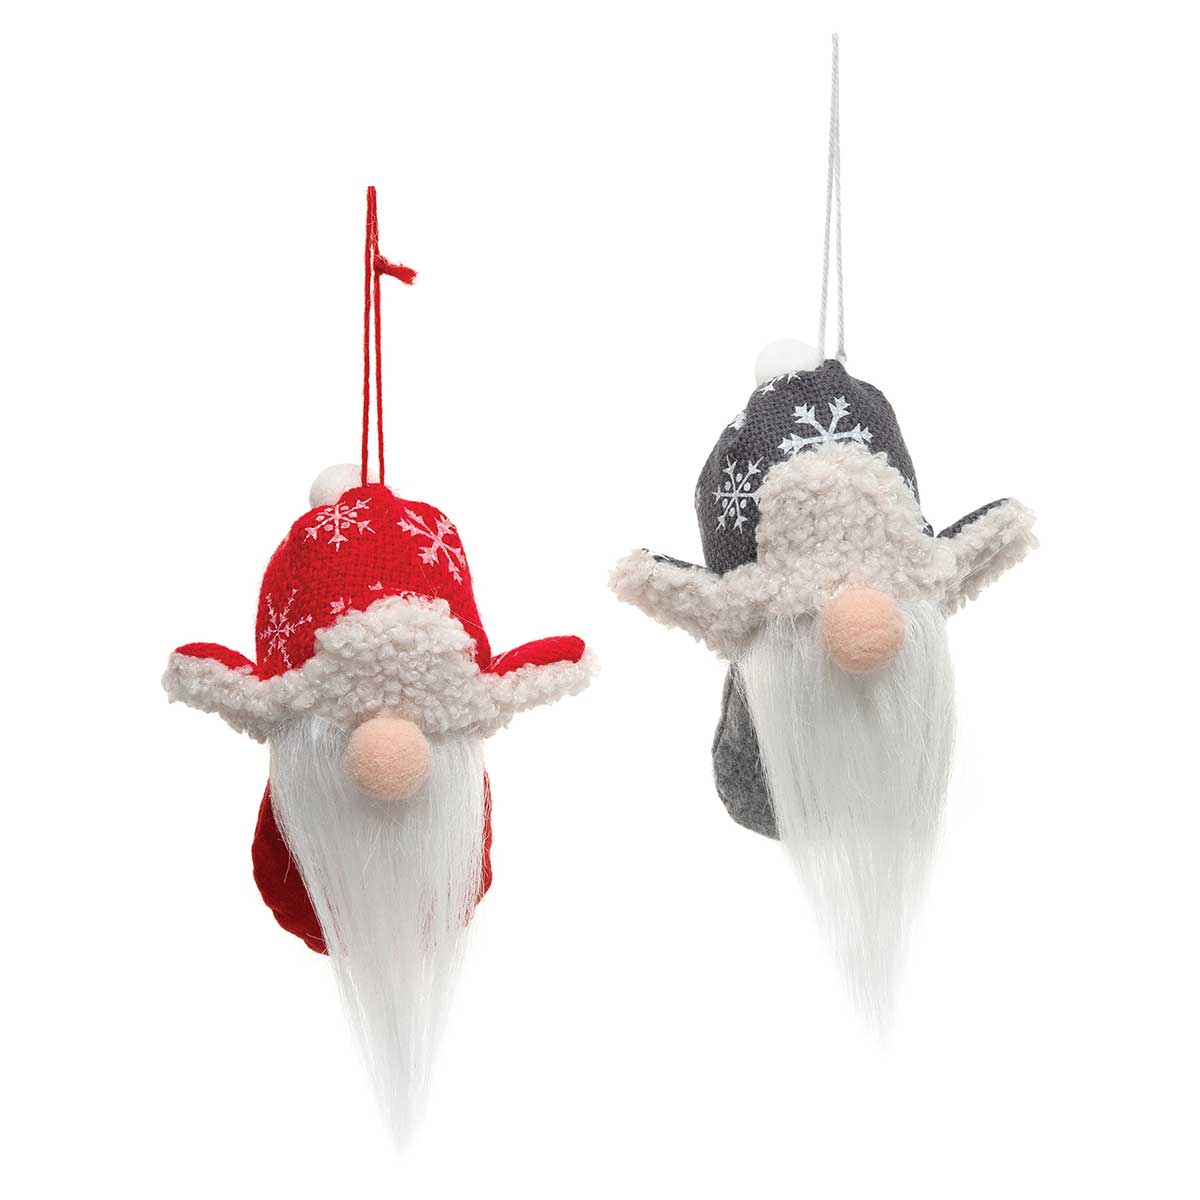 ORN FLAP HAT GNOME 2 ASSORTED 3IN X 2IN X 4.5IN RED/GREY - Click Image to Close